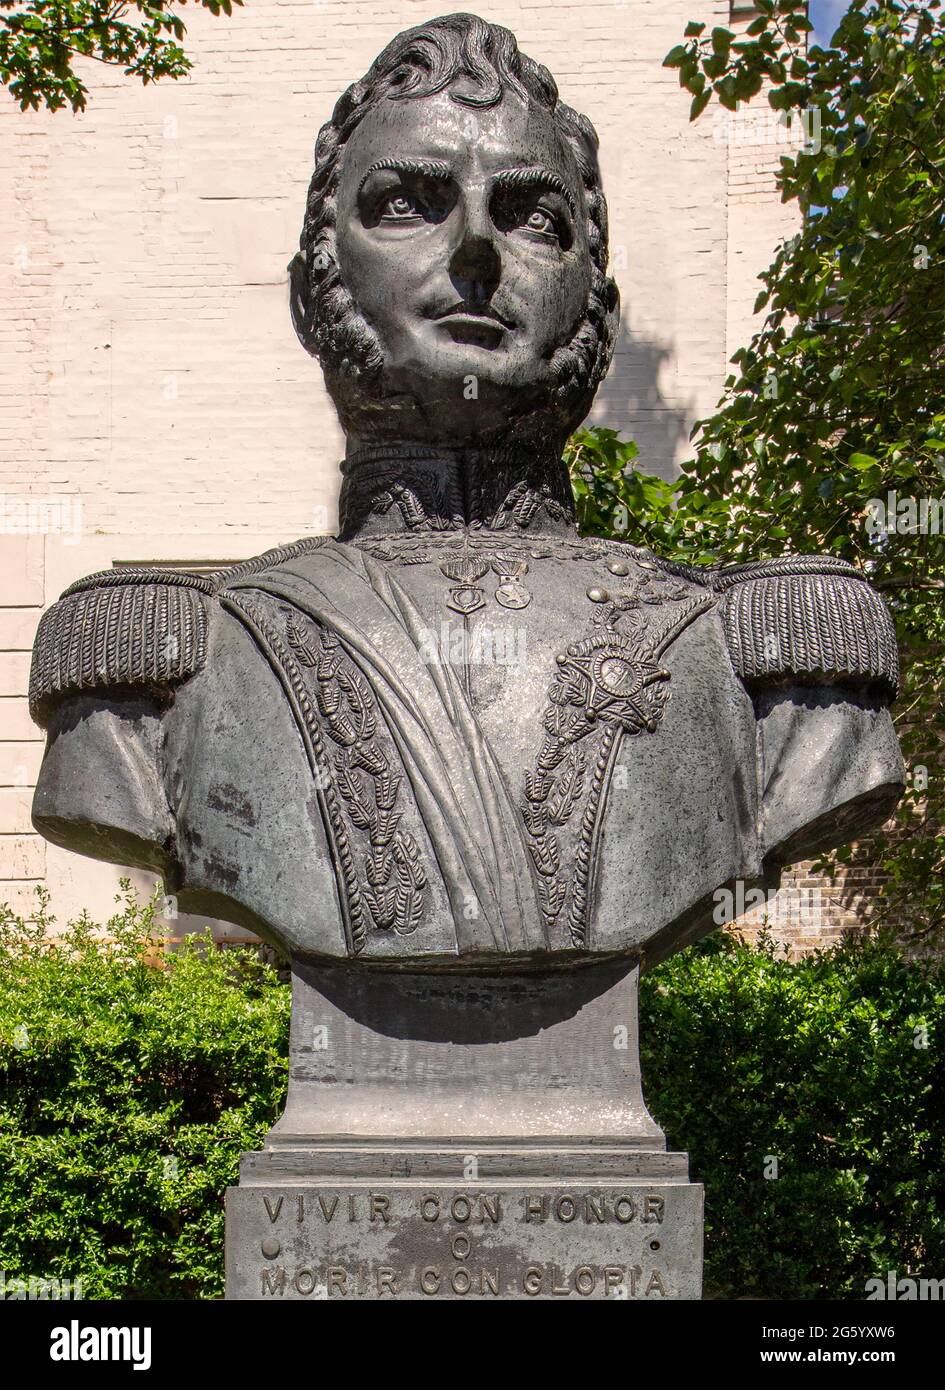 Bust of Bernardo O'Higgins Riquelme ('Liberator of Chile') (1778-1842) in Richmond, UK; Chilean Independence leader Stock Photo